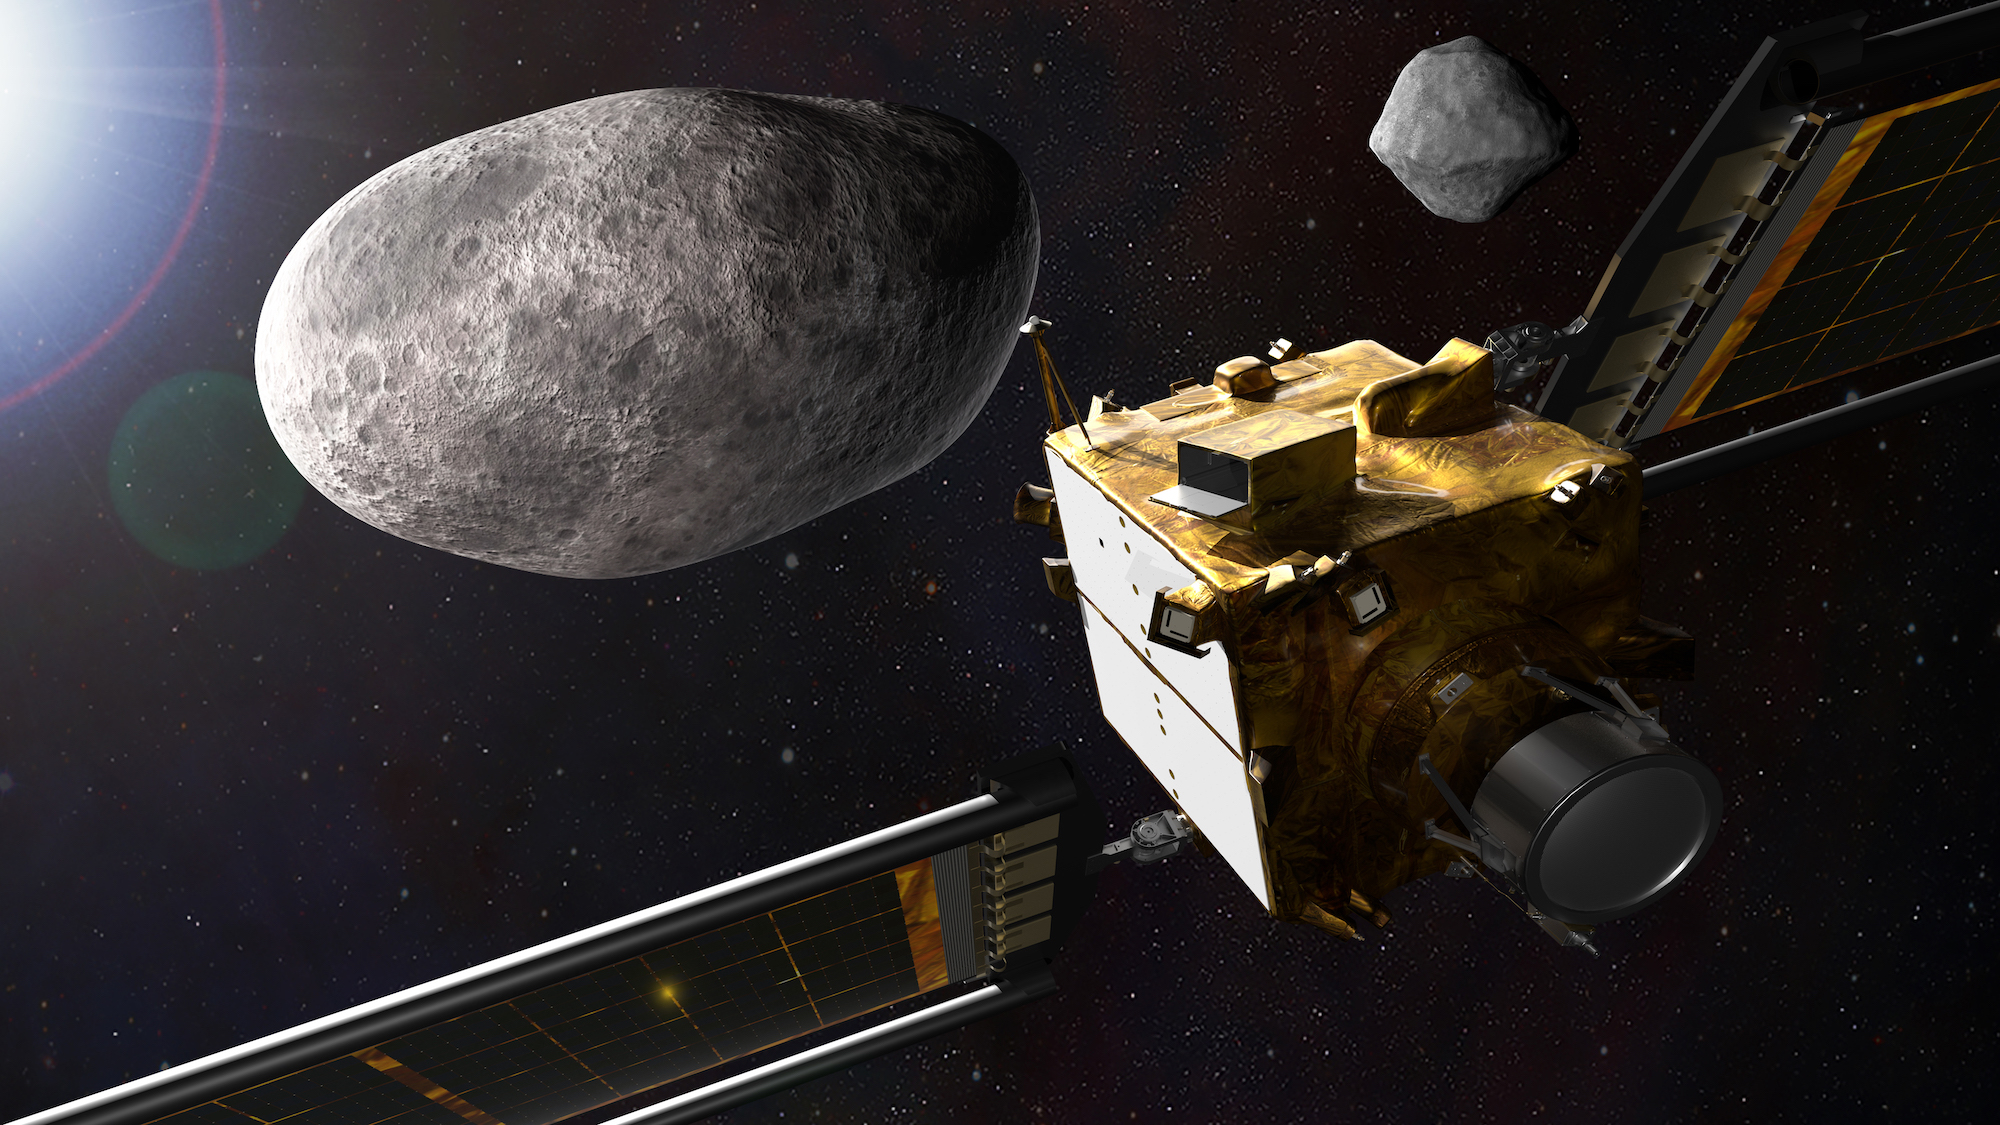 DART, NASA’s first planetary defense mission, will demonstrate asteroid deflection using a kinetic impactor technique.